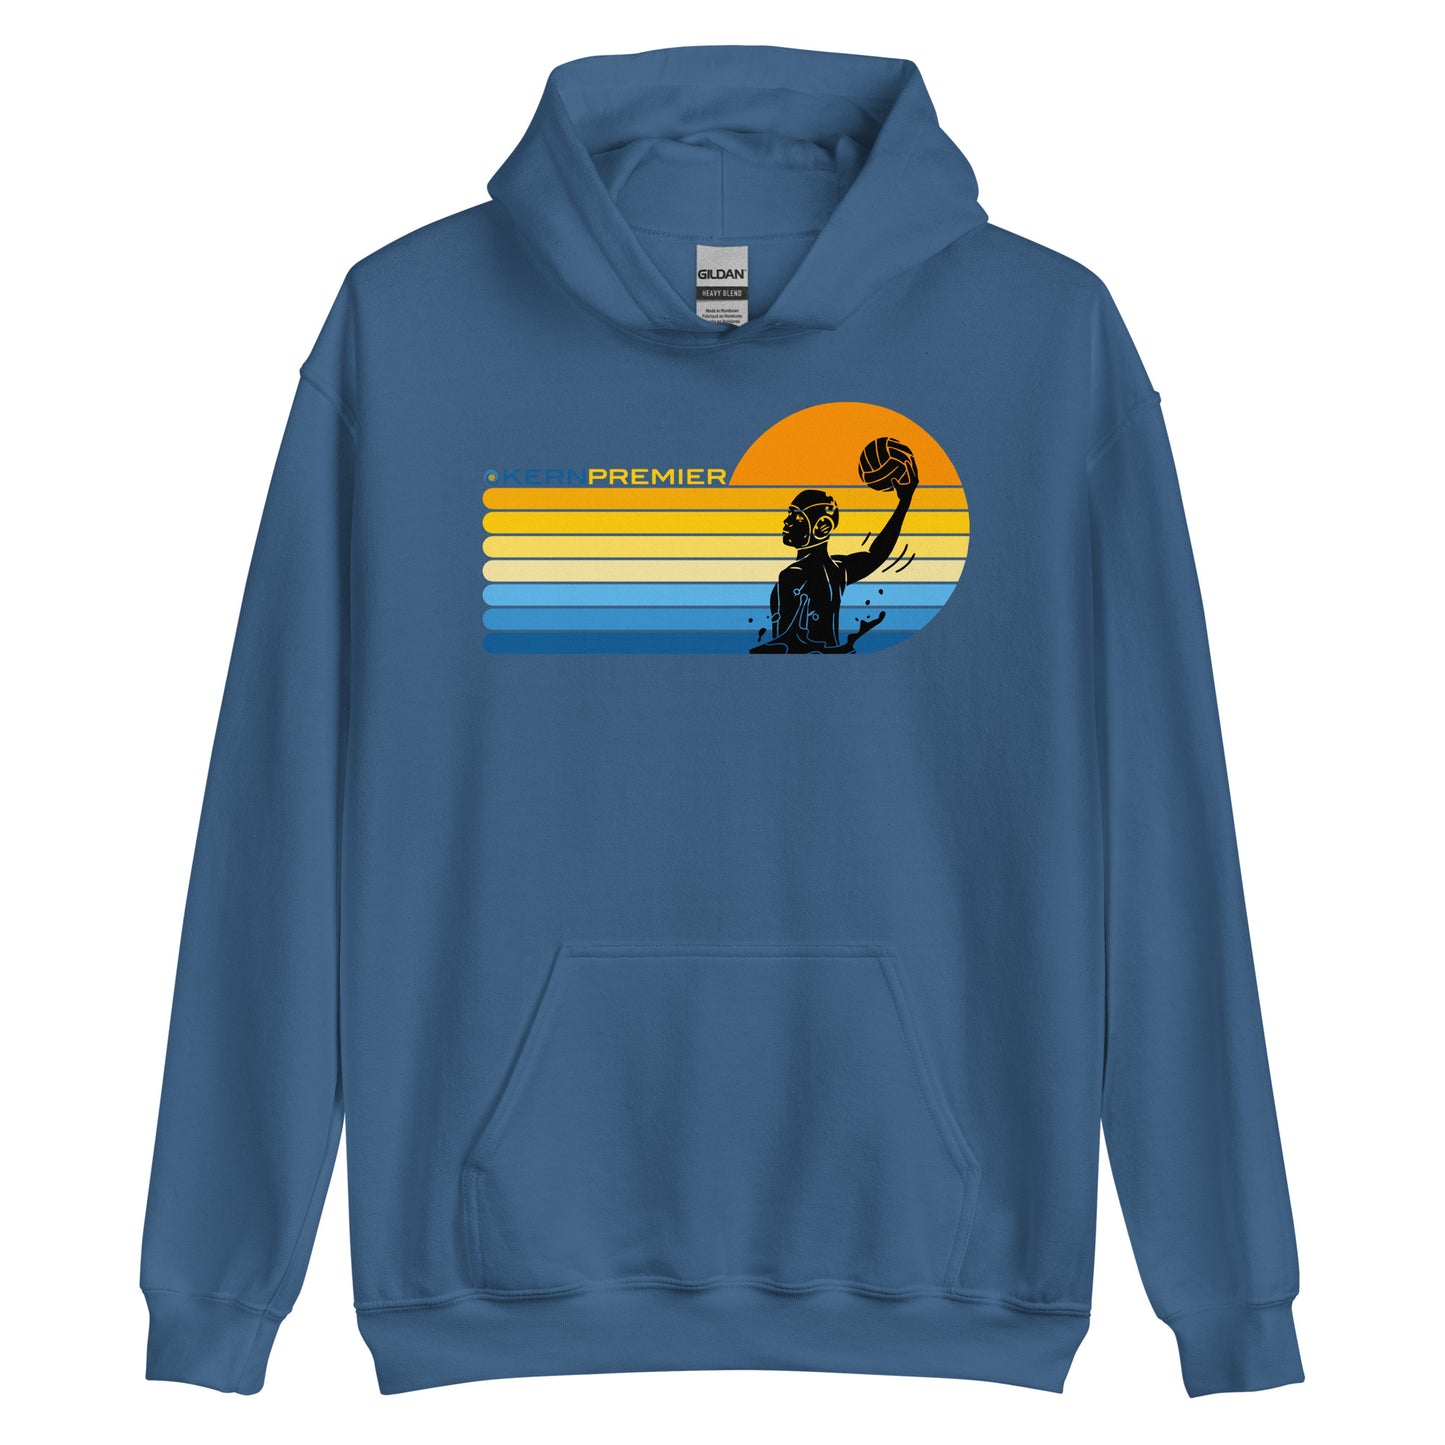 Kern Premier - 7 Color Right sided Sunset with Male with Logo on Top - Unisex Heavy Blend Hoodie - Gildan 18500